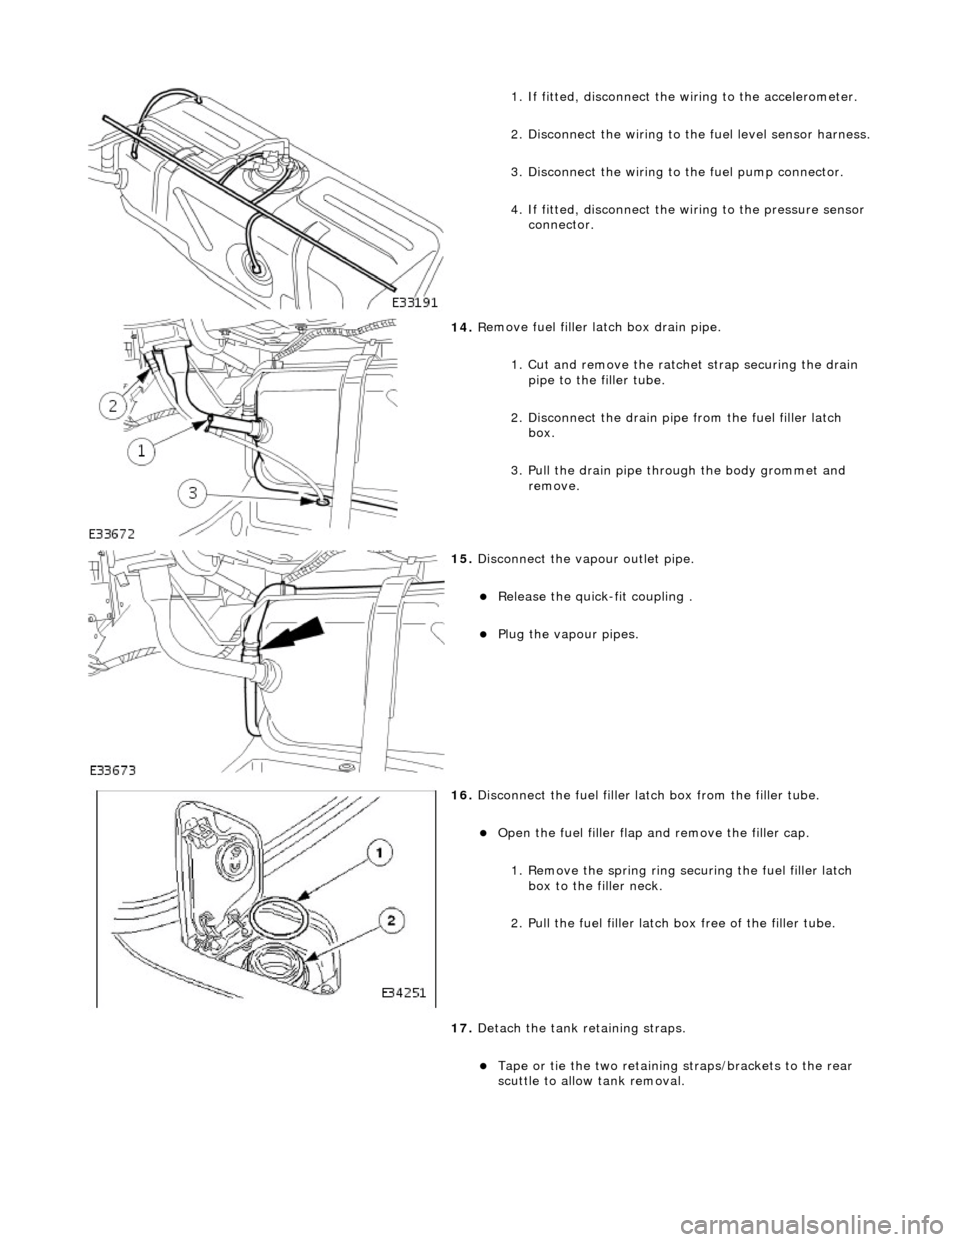 JAGUAR X308 1998 2.G Service Manual  
1.
 If fitted, disconnect the 
wiring to the accelerometer. 
2. Disconnect the wiring to  the fuel level sensor harness.
 
3.
 Disc
 onnect the wiring to 
the fuel pump connector.  
4. If fitted, di